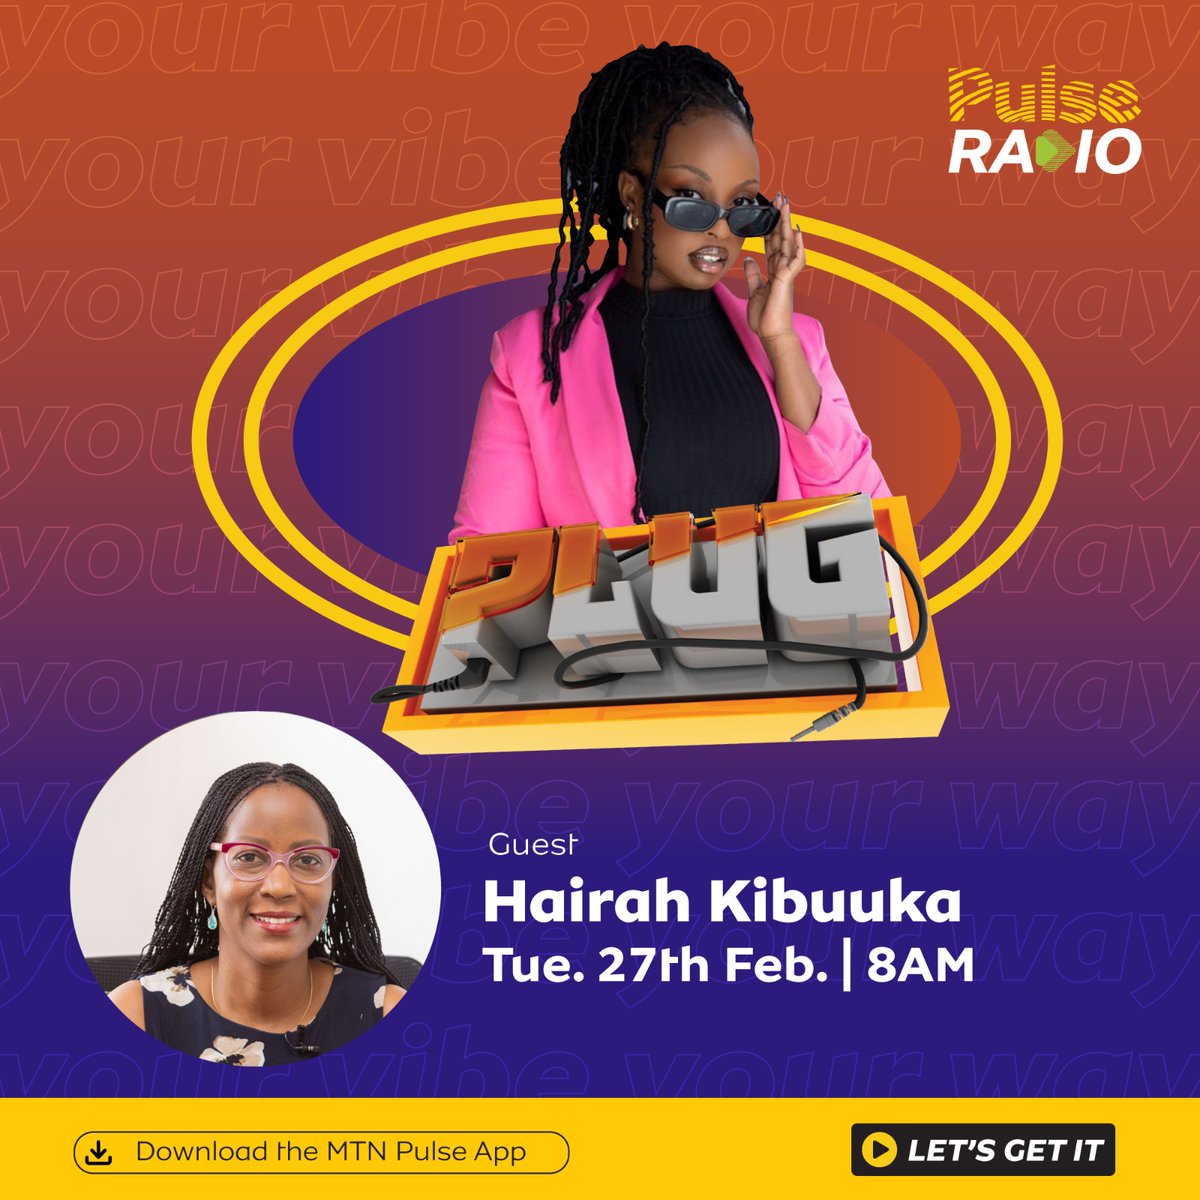 Do you want to study abroad? Get plugged with the latest opportunities with @tracyikopit as we feature Managing Director @SharzConsults, @hairahk tomorrow at 8 am. #PulseRadioUG #ElevateYourSuccess #WithSharz